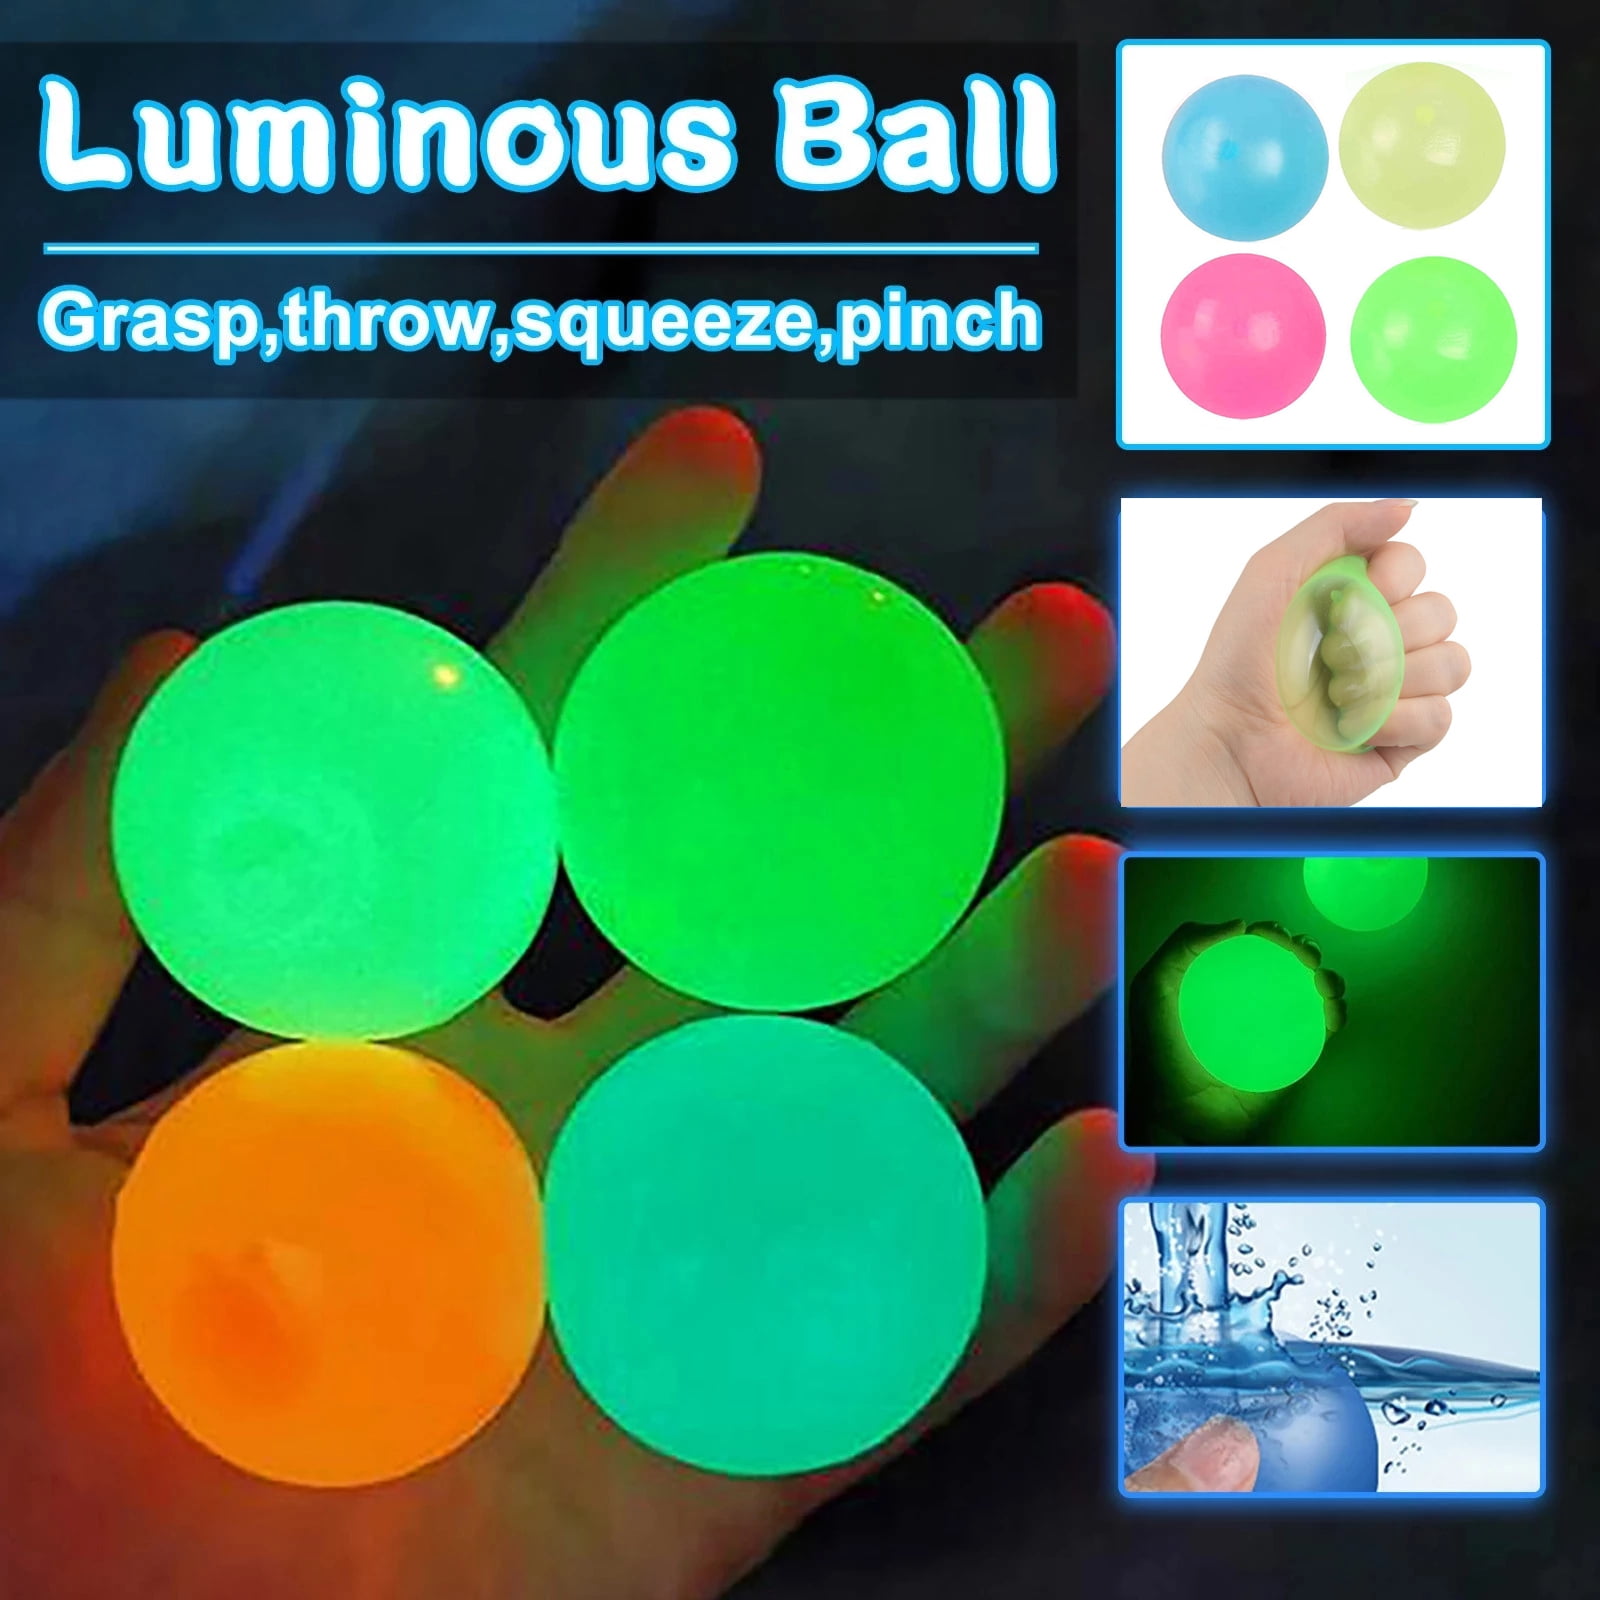 16 Pieces Glow in The Dark Sticky Balls Luminous Stress Balls Glowing Ceiling Balls Fluorescence Fidget Balls Sensory Fidget Toys Stress Relieve Toys for Teens and Adults 